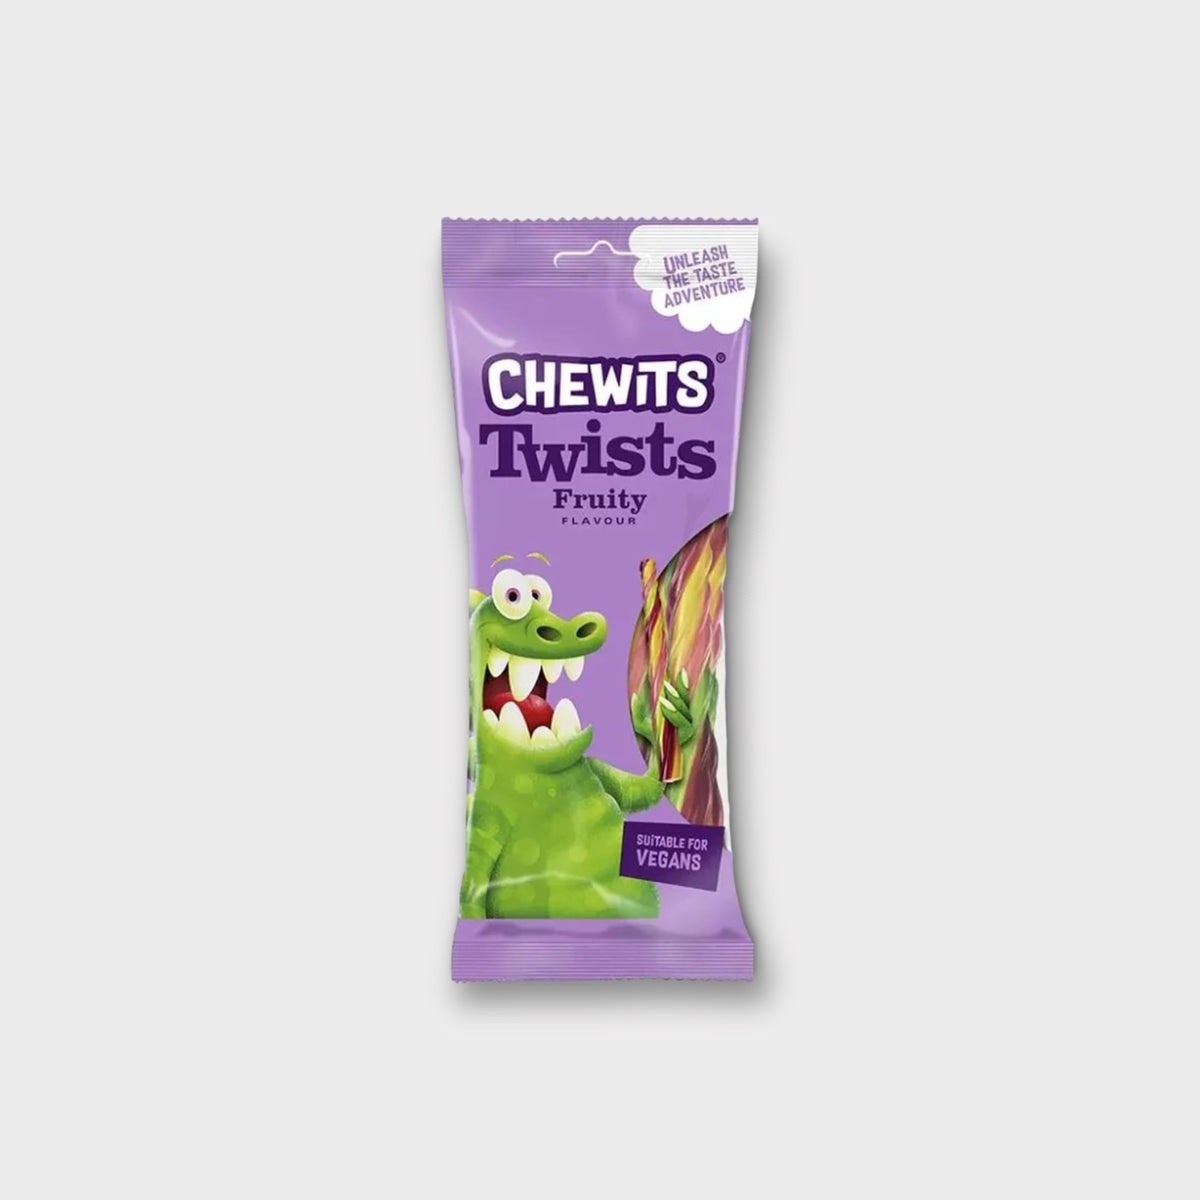 Chewits Twists Fruity